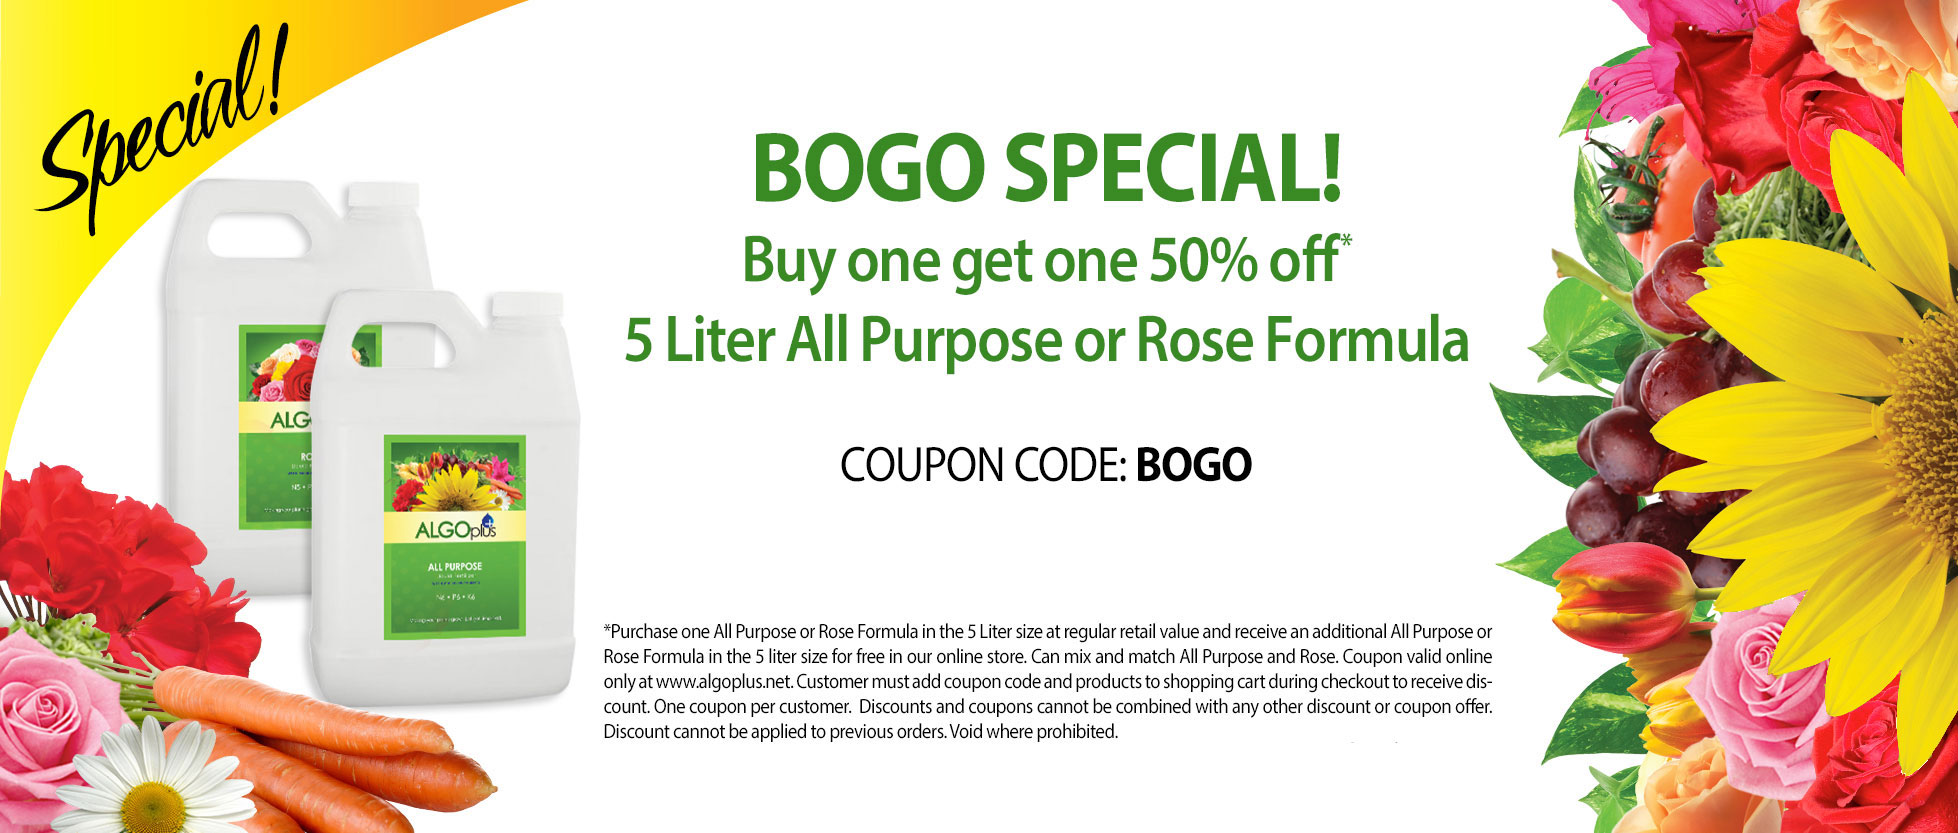 BOGO Special! Buy one get one 50% off - All Purpose and Rose 5 Liter size